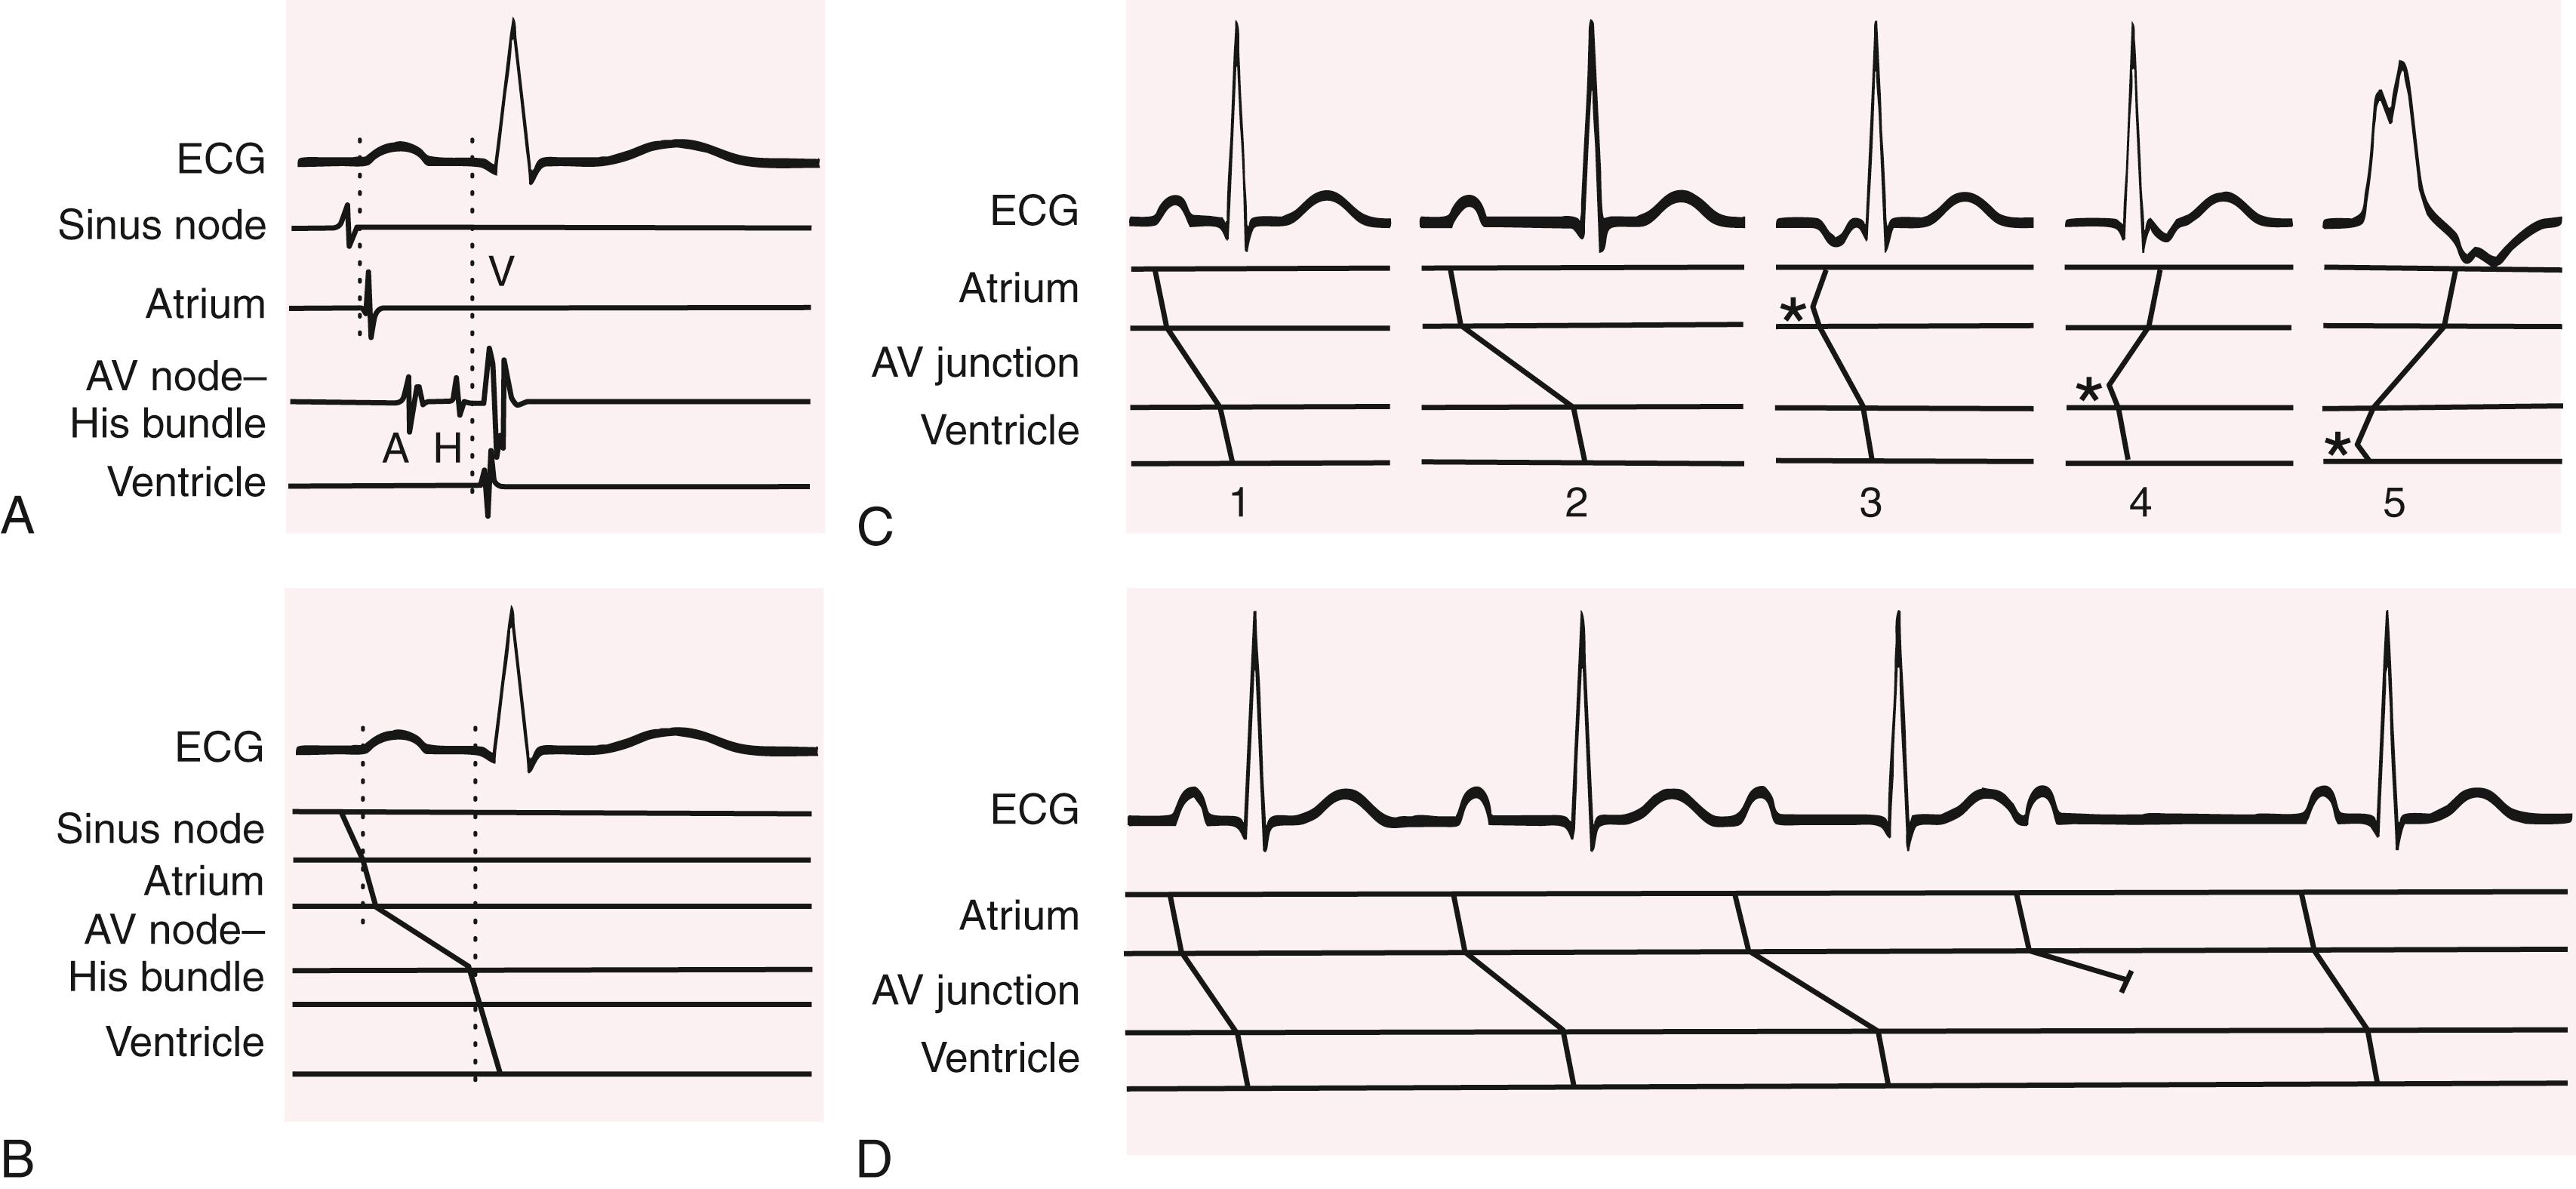 FIGURE 61.8, Intracardiac signals and ladder diagrams. A, A single beat is shown with accompanying intracardiac signals from the sinus node, right atrium, atrioventricular (AV) nodal and His bundle regions, and right ventricle. B, The same beat is shown with the accompanying ladder diagram below. Cardiac regions have been divided into tiers separated by horizontal lines. Vertical dotted lines denote onset of the P wave and QRS complexes. The relatively steep lines indicate rapid conduction through the atrium, His bundle, and ventricular muscle and more gently sloping lines the slower conduction in the sinus and AV nodes. C, Different situations with accompanying explanatory ladder diagrams. Beat 1 is normal, as in B ; beat 2 shows first-degree AV delay, with the more gradual slope than normal in the AV nodal tier signifying very slow conduction in this region. In beat 3 an atrial premature complex is shown (starting in the atrial tier at the asterisk ) and is producing an inverted P wave on the ECG. In beat 4 an ectopic impulse arises in the His bundle (asterisk) and propagates to the ventricle, as well as retrogradely through the AV node to the atrium. In beat 5 a ventricular ectopic complex (asterisk) conducts retrogradely through the His bundle and AV node and eventually to the atrium. D, Wenckebach AV cycle (type I second-degree block). As the PR interval progressively increases from left to right in the figure, the slope of the line in the AV nodal region flattens until it fails to propagate at all after the fourth P wave (small line perpendicular to the sloping AV nodal conduction line), after which the cycle repeats. A, Atrial recording; H, His recording; V, ventricular recording.